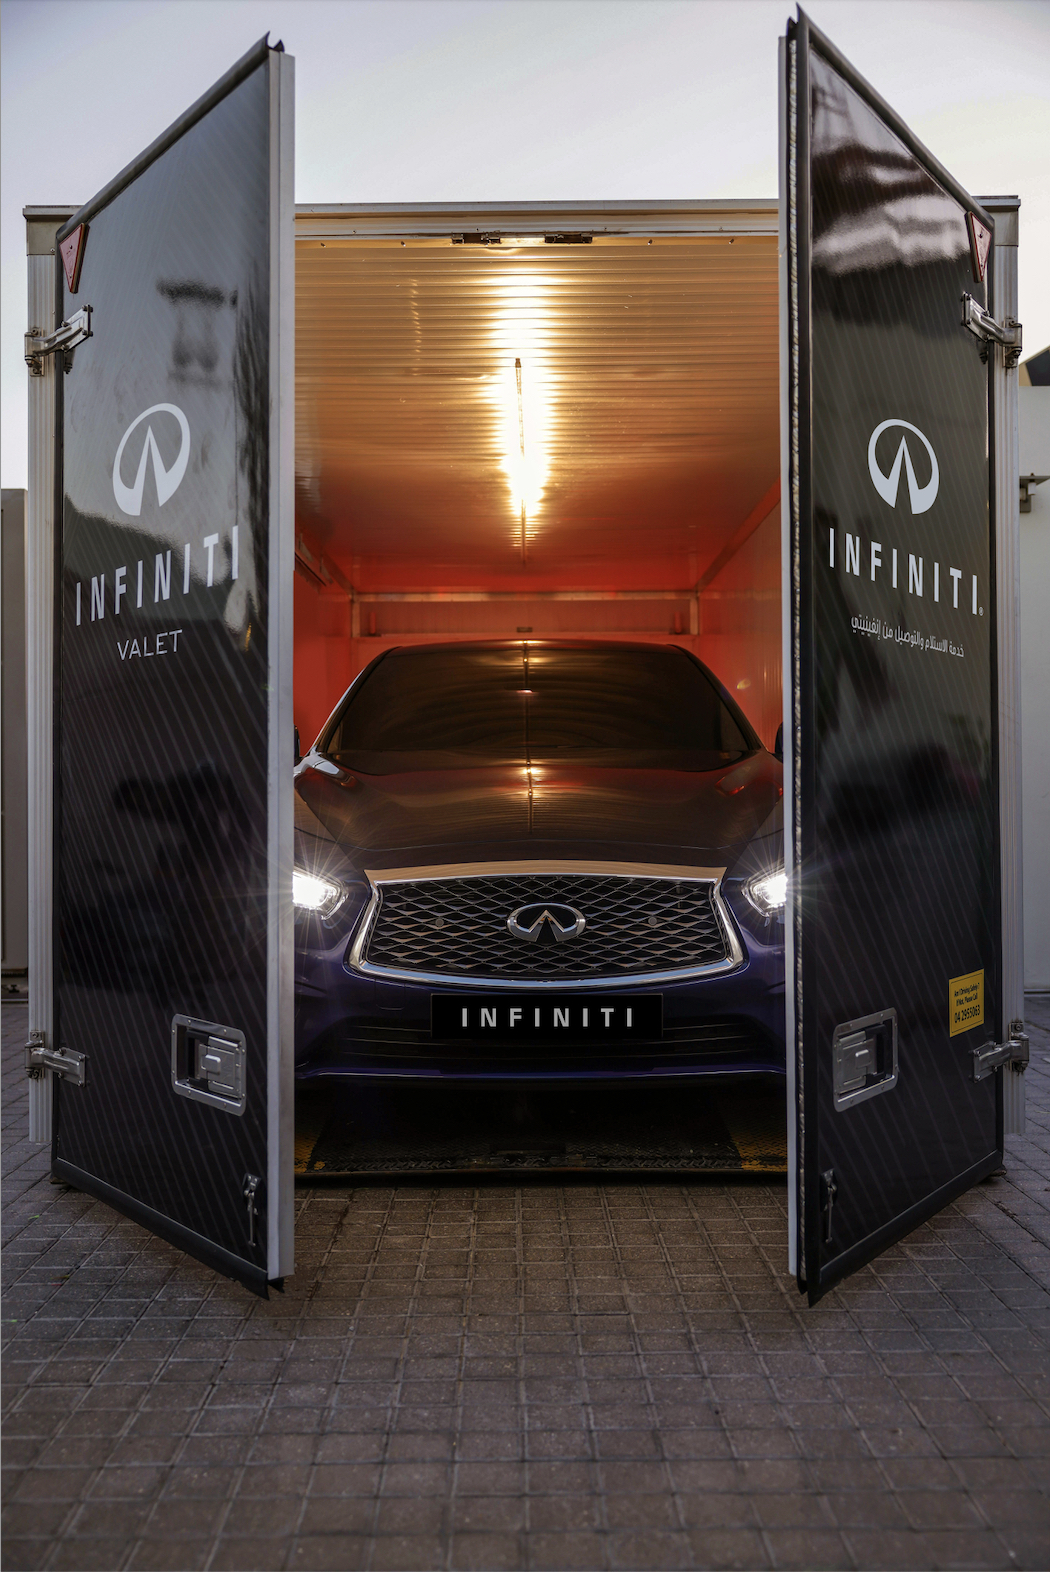 INFINITI VALET: A PREMIUM SERVICE OFFERING FOR MIDDLE EAST CUSTOMERS 